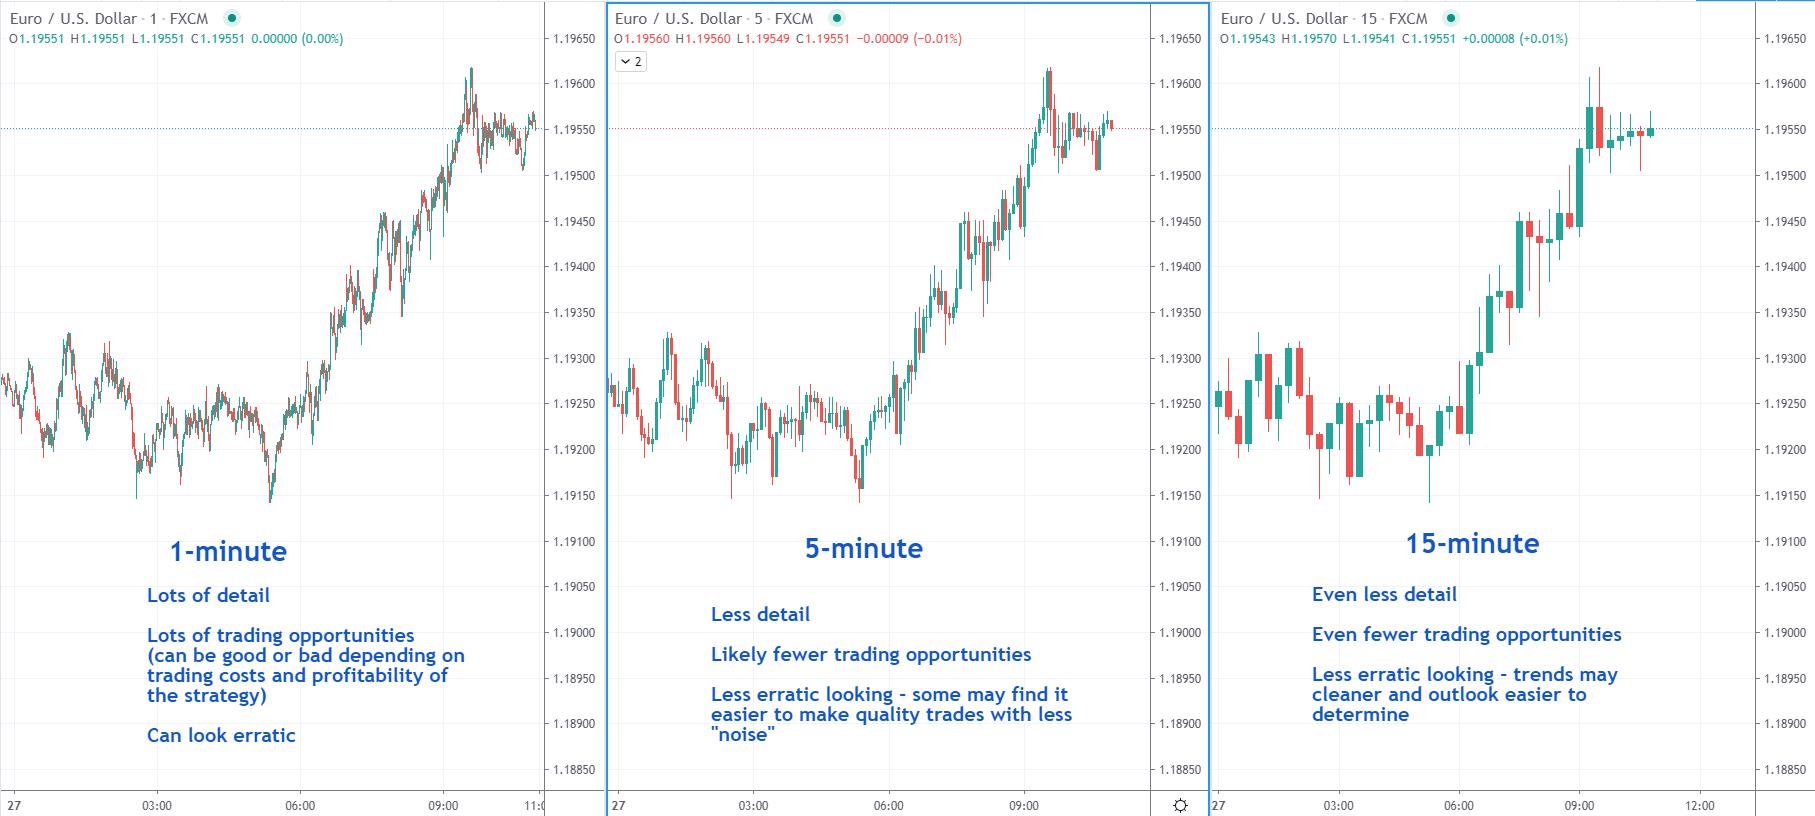 Forex trading daily highs and lows of stocks moving averages forex pdf ebook